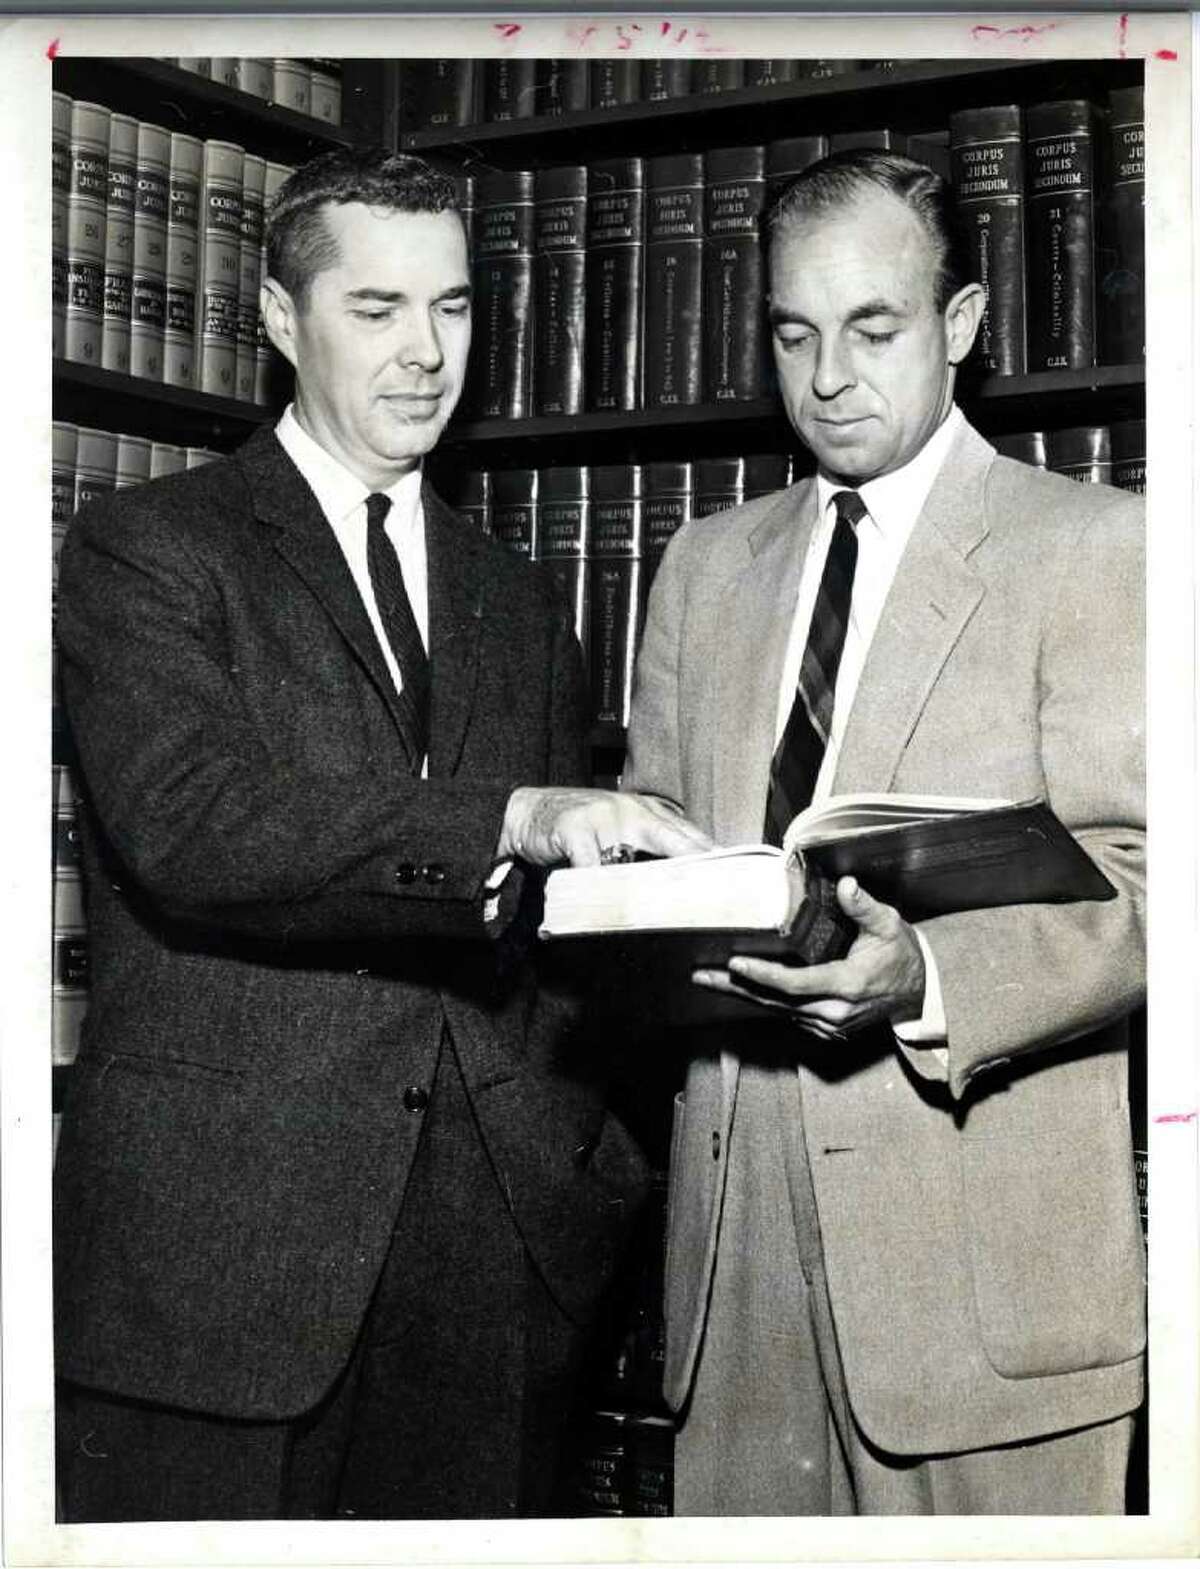 Frank Briscoe, left, and Wallace C. "Pete" Moore look at law book in 1960. Houston Chronicle file photo